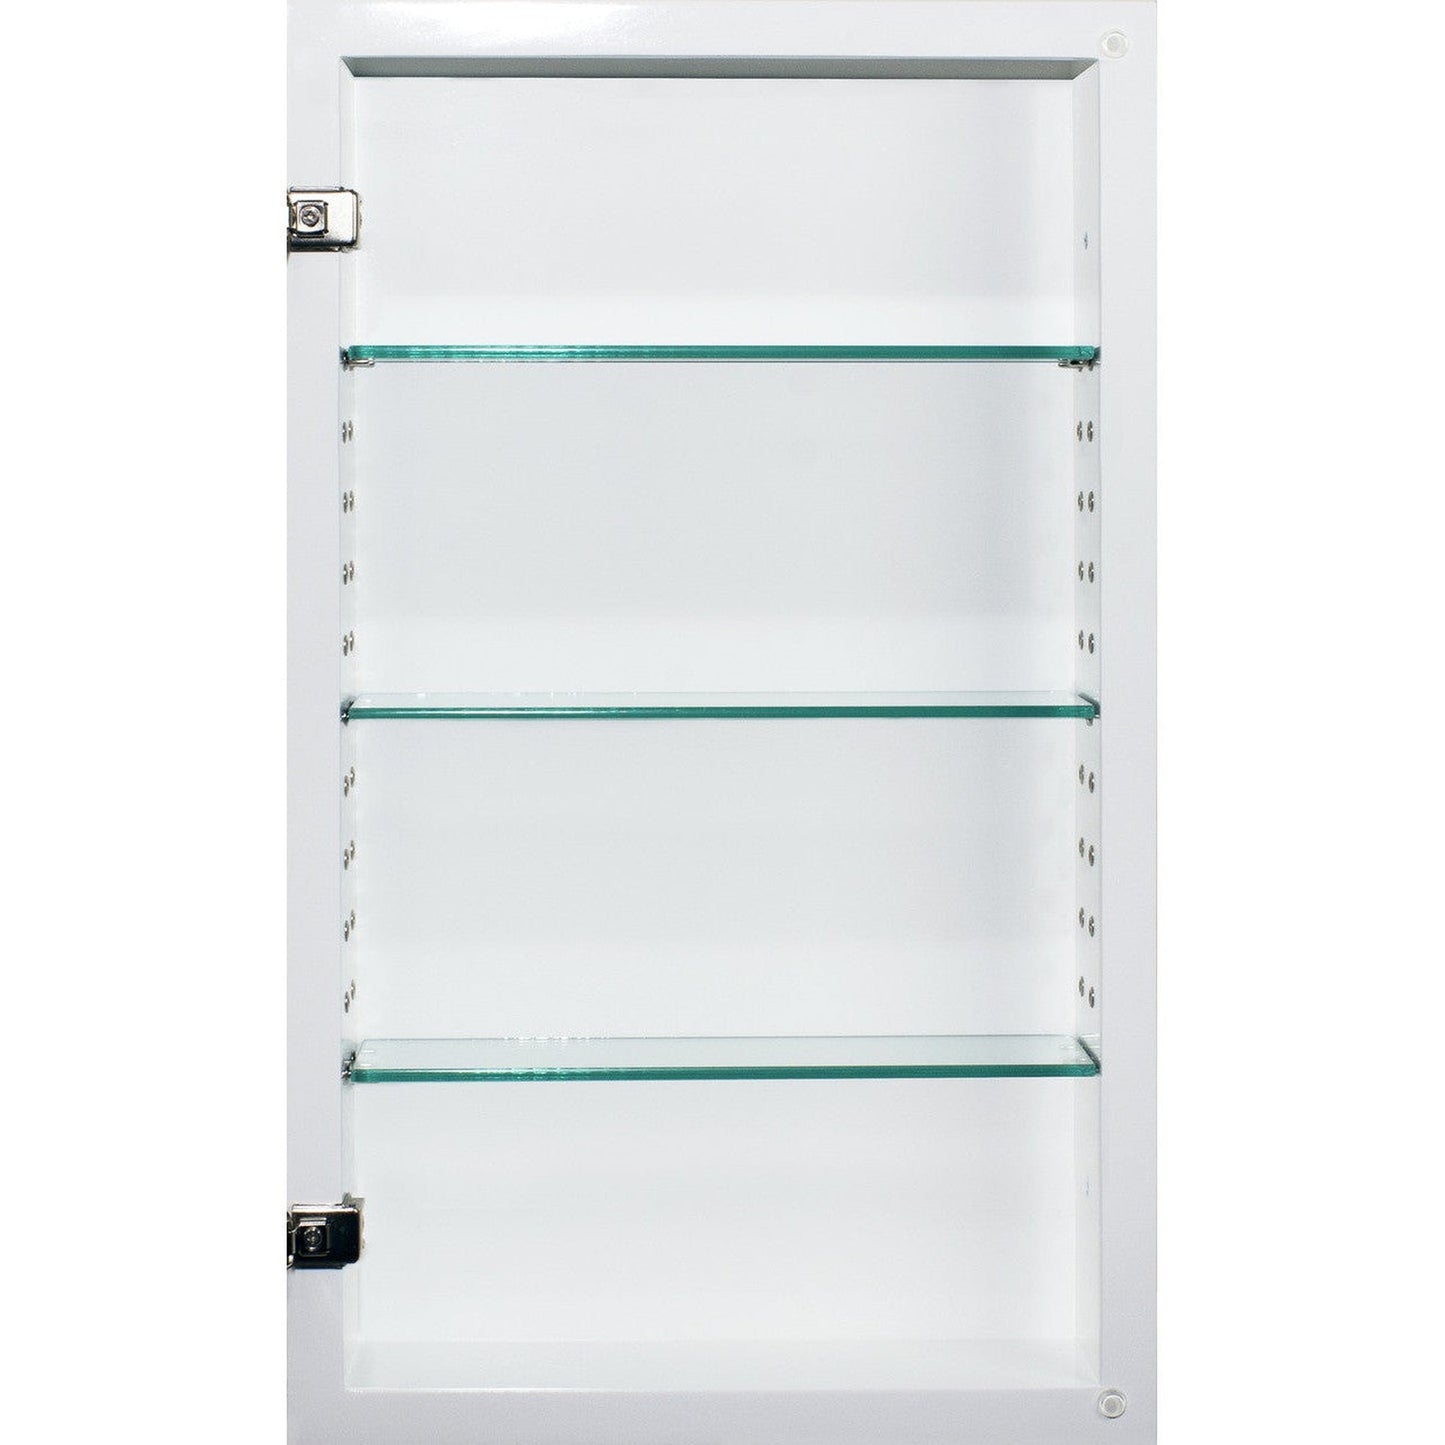 Fox Hollow Furnishings 14" x 24" Unfinished Raised Edge Special 6" Depth White Interior Mirrored Medicine Cabinet